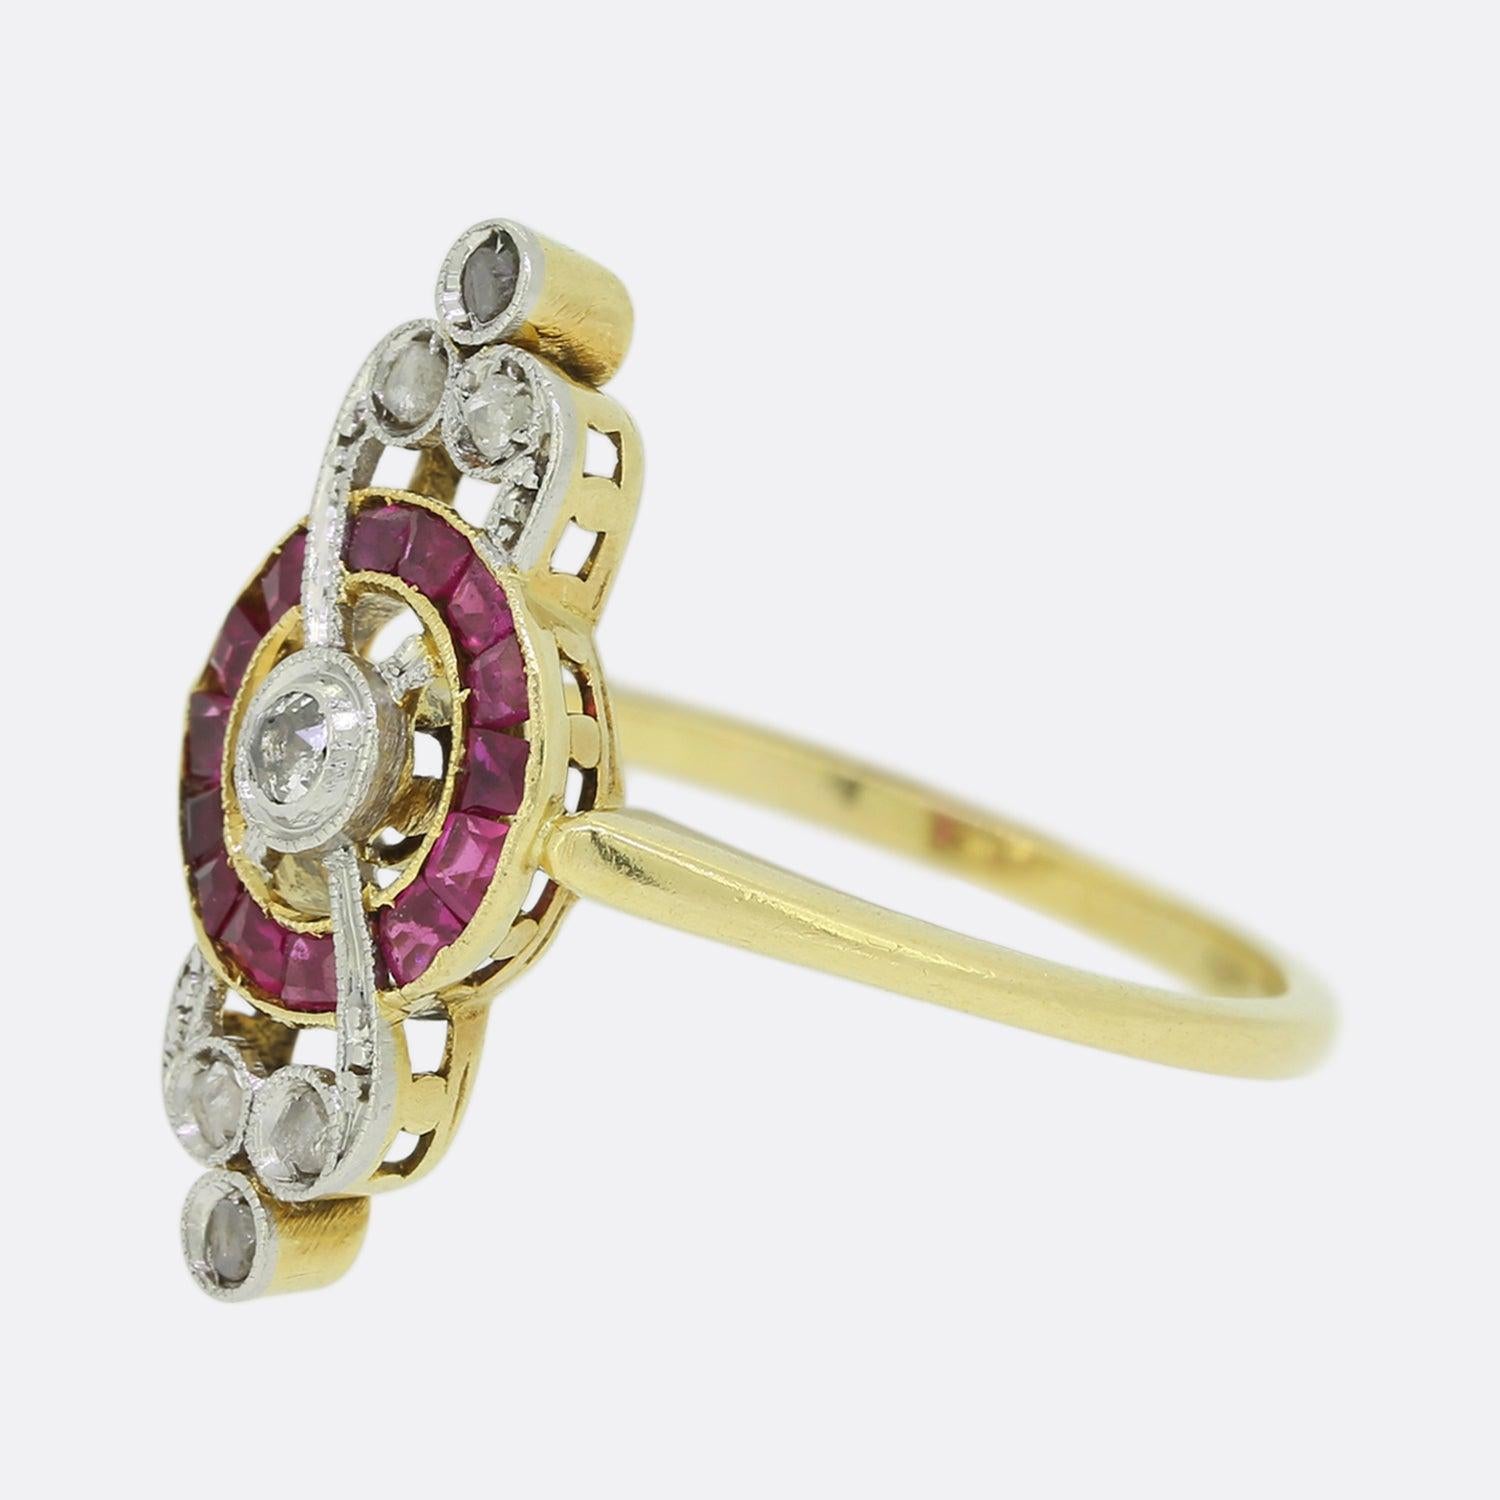 This is an Edwardian 18ct yellow gold ruby and diamond ring. The ring features a target centre with a single old cut diamond surrounded by 14 calibrated rubies. Above and below the centre there are 3 sparkling rose cut diamonds. The ring has a free